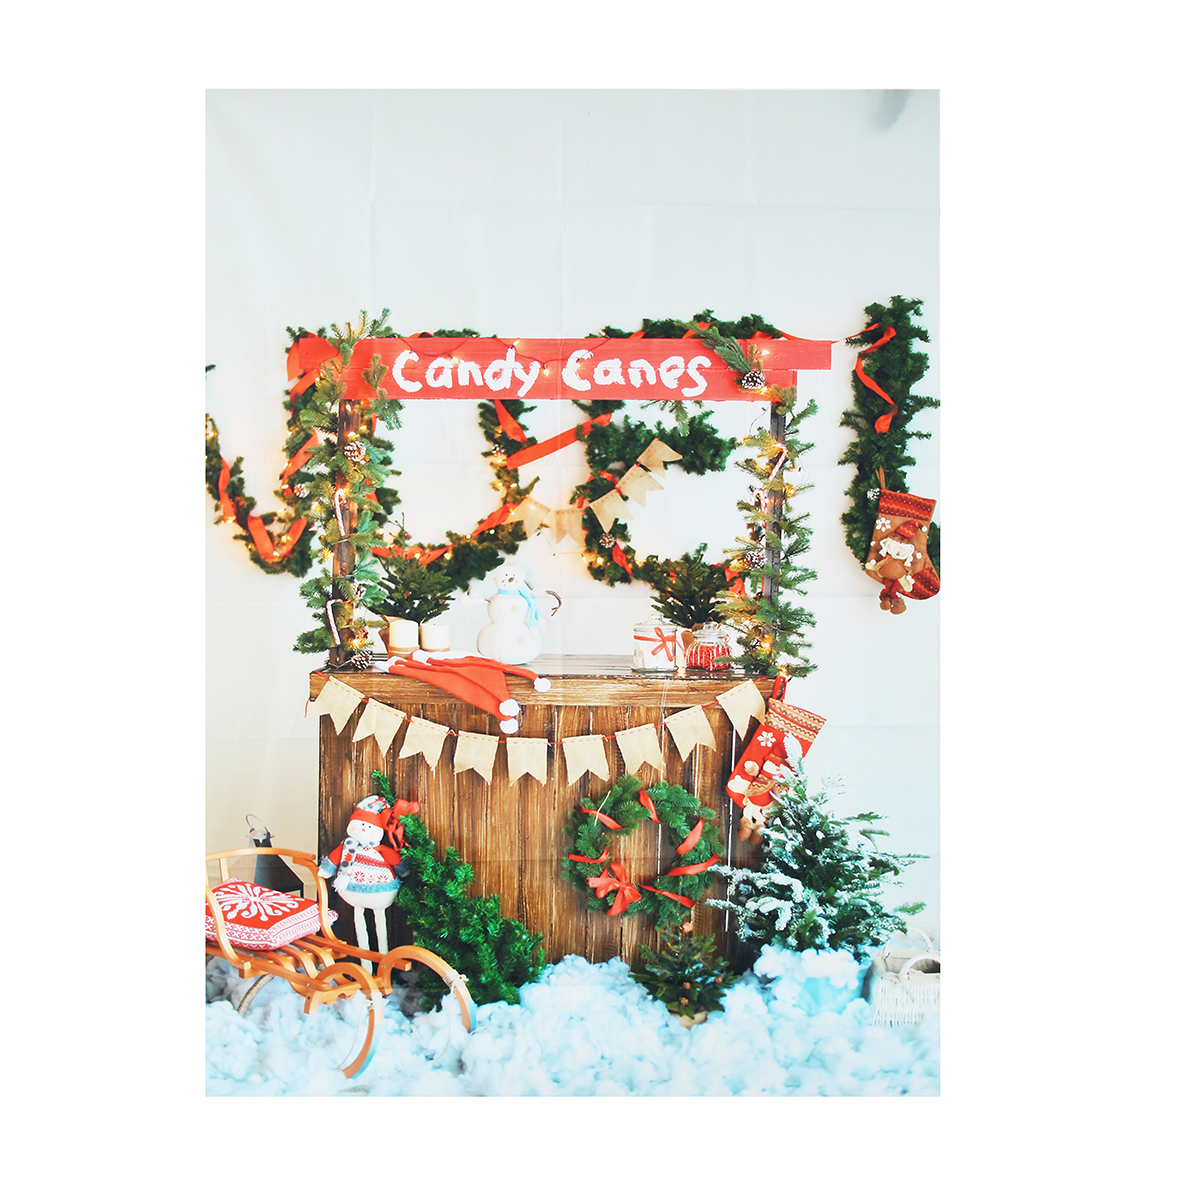 5x7FT-Christmas-Candy-Canes-Photography-Backdrop-Background-Studio-Prop-1208715-2